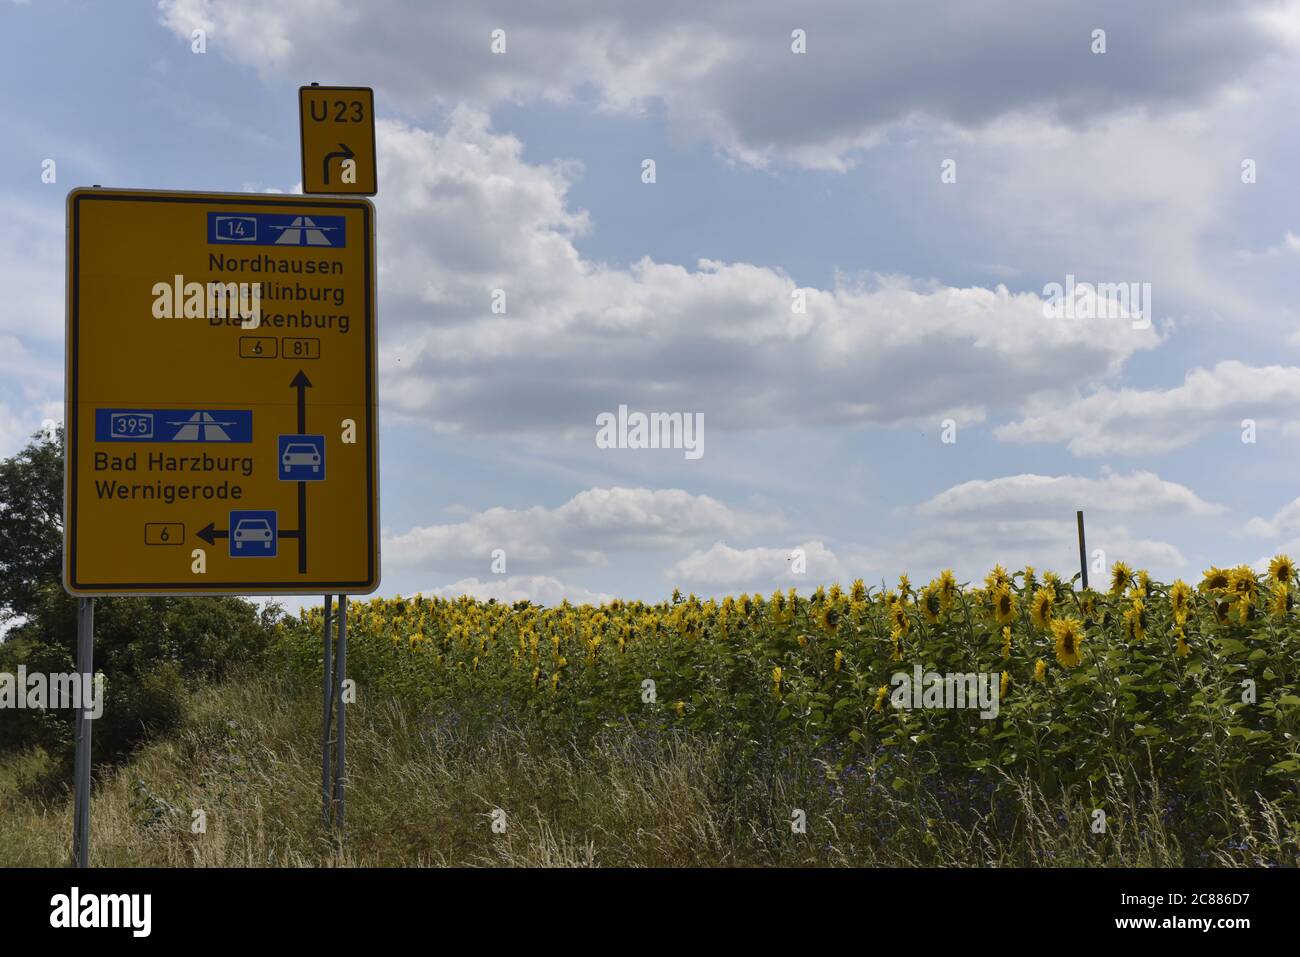 Highway through the field of sunflowers Stock Photo